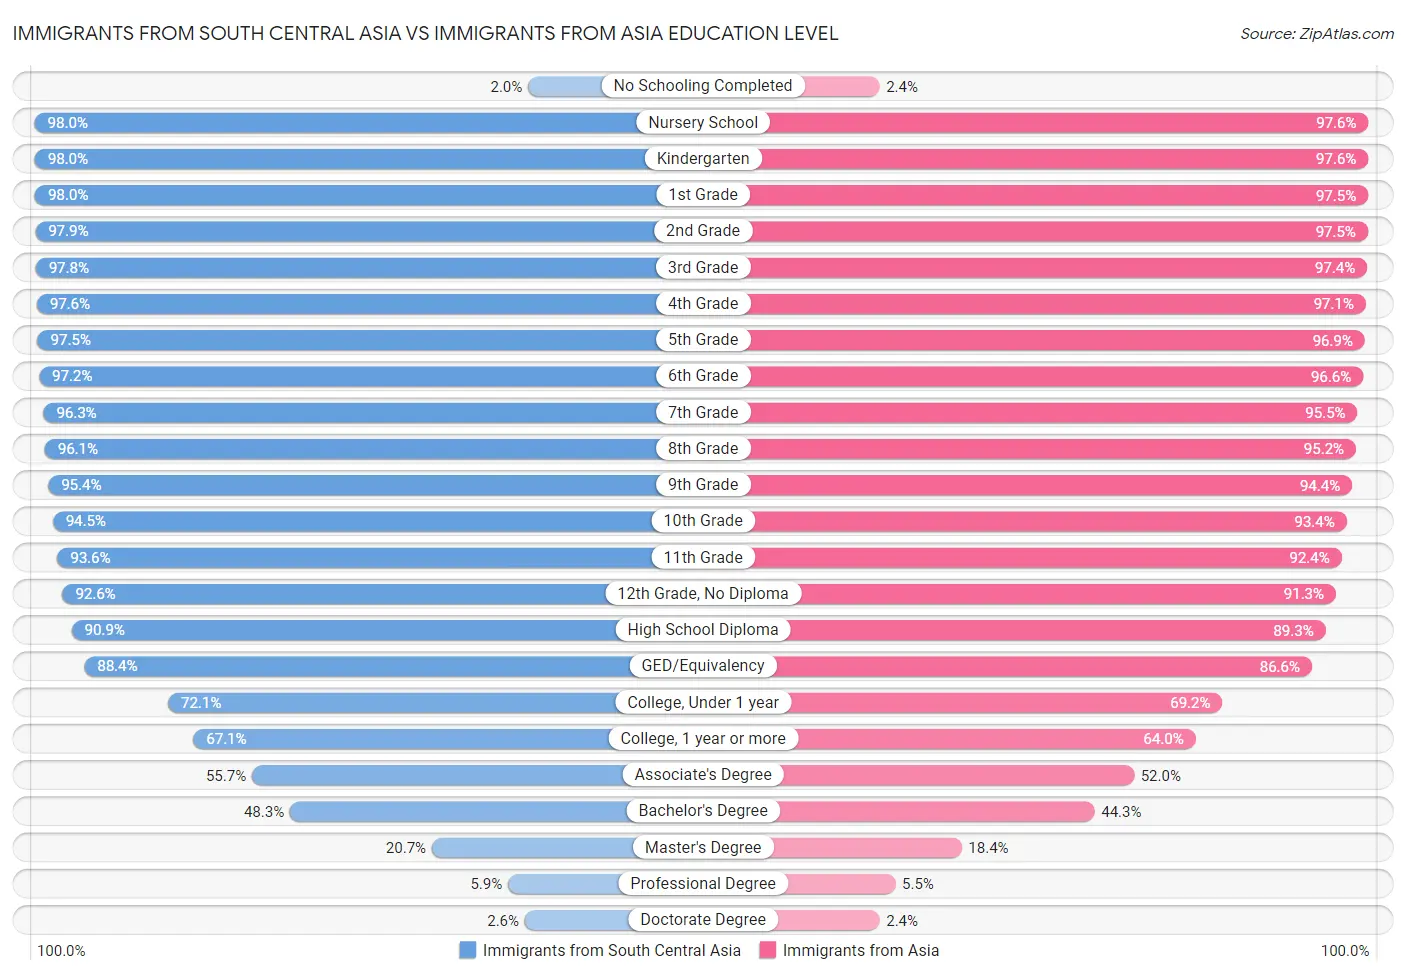 Immigrants from South Central Asia vs Immigrants from Asia Education Level